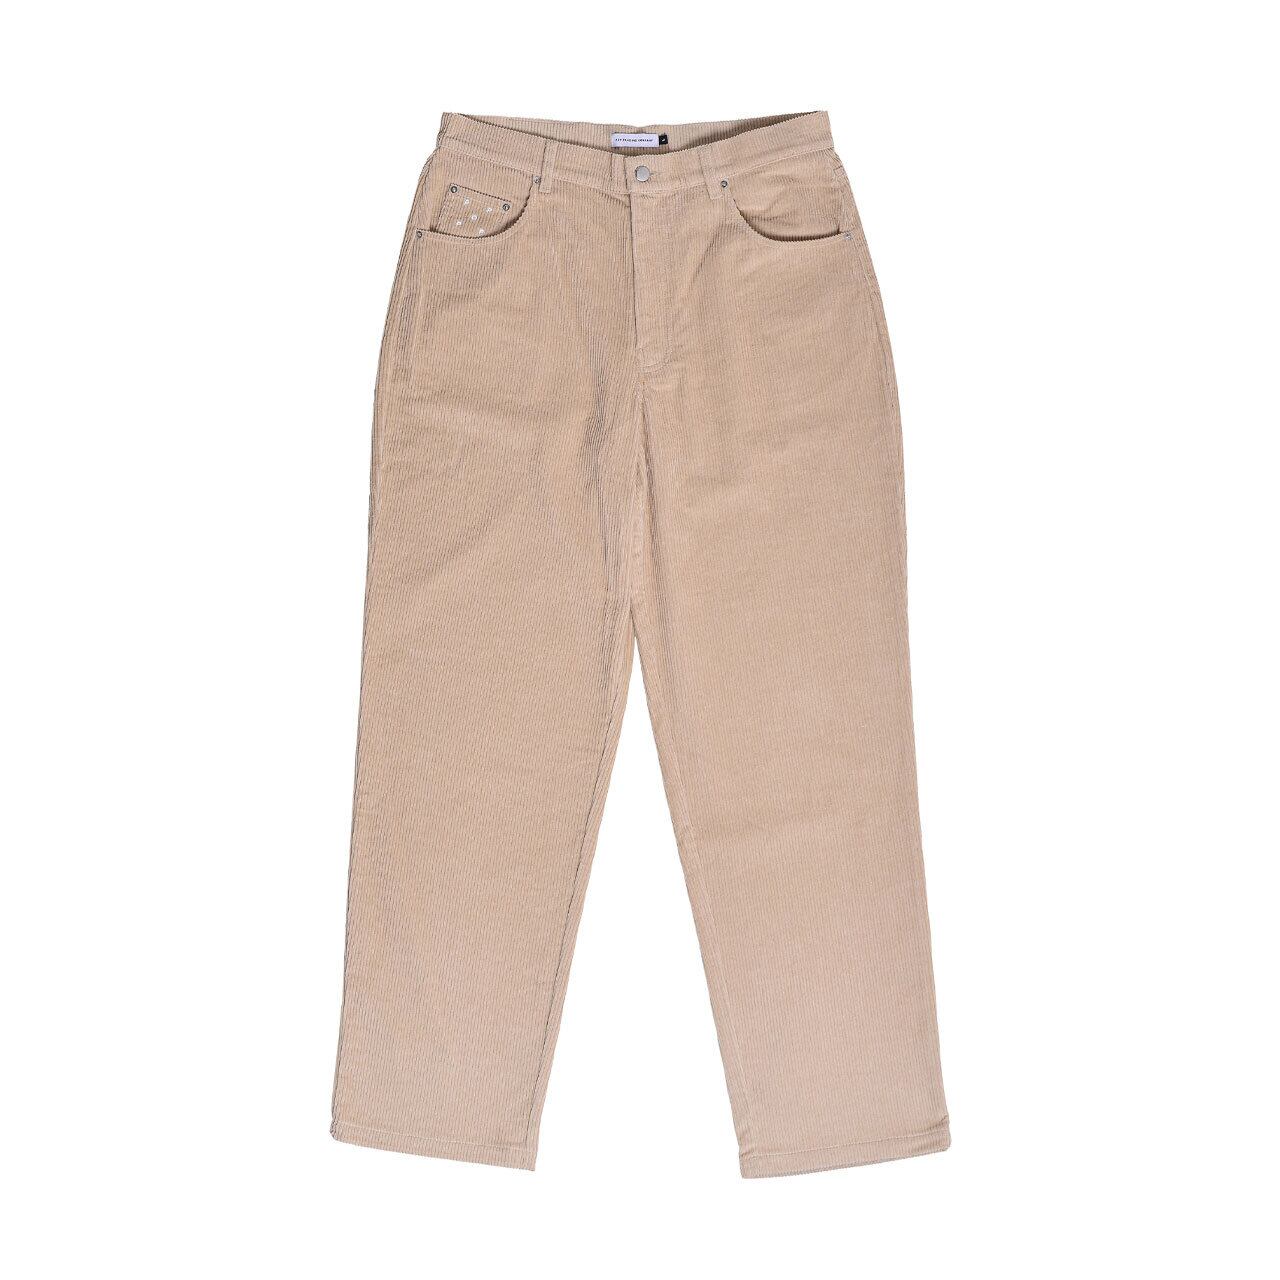 POP TRADING COMPANY/ポップトレーディングカンパニー/ DRS CORD PANT IN WHITE PEPPER